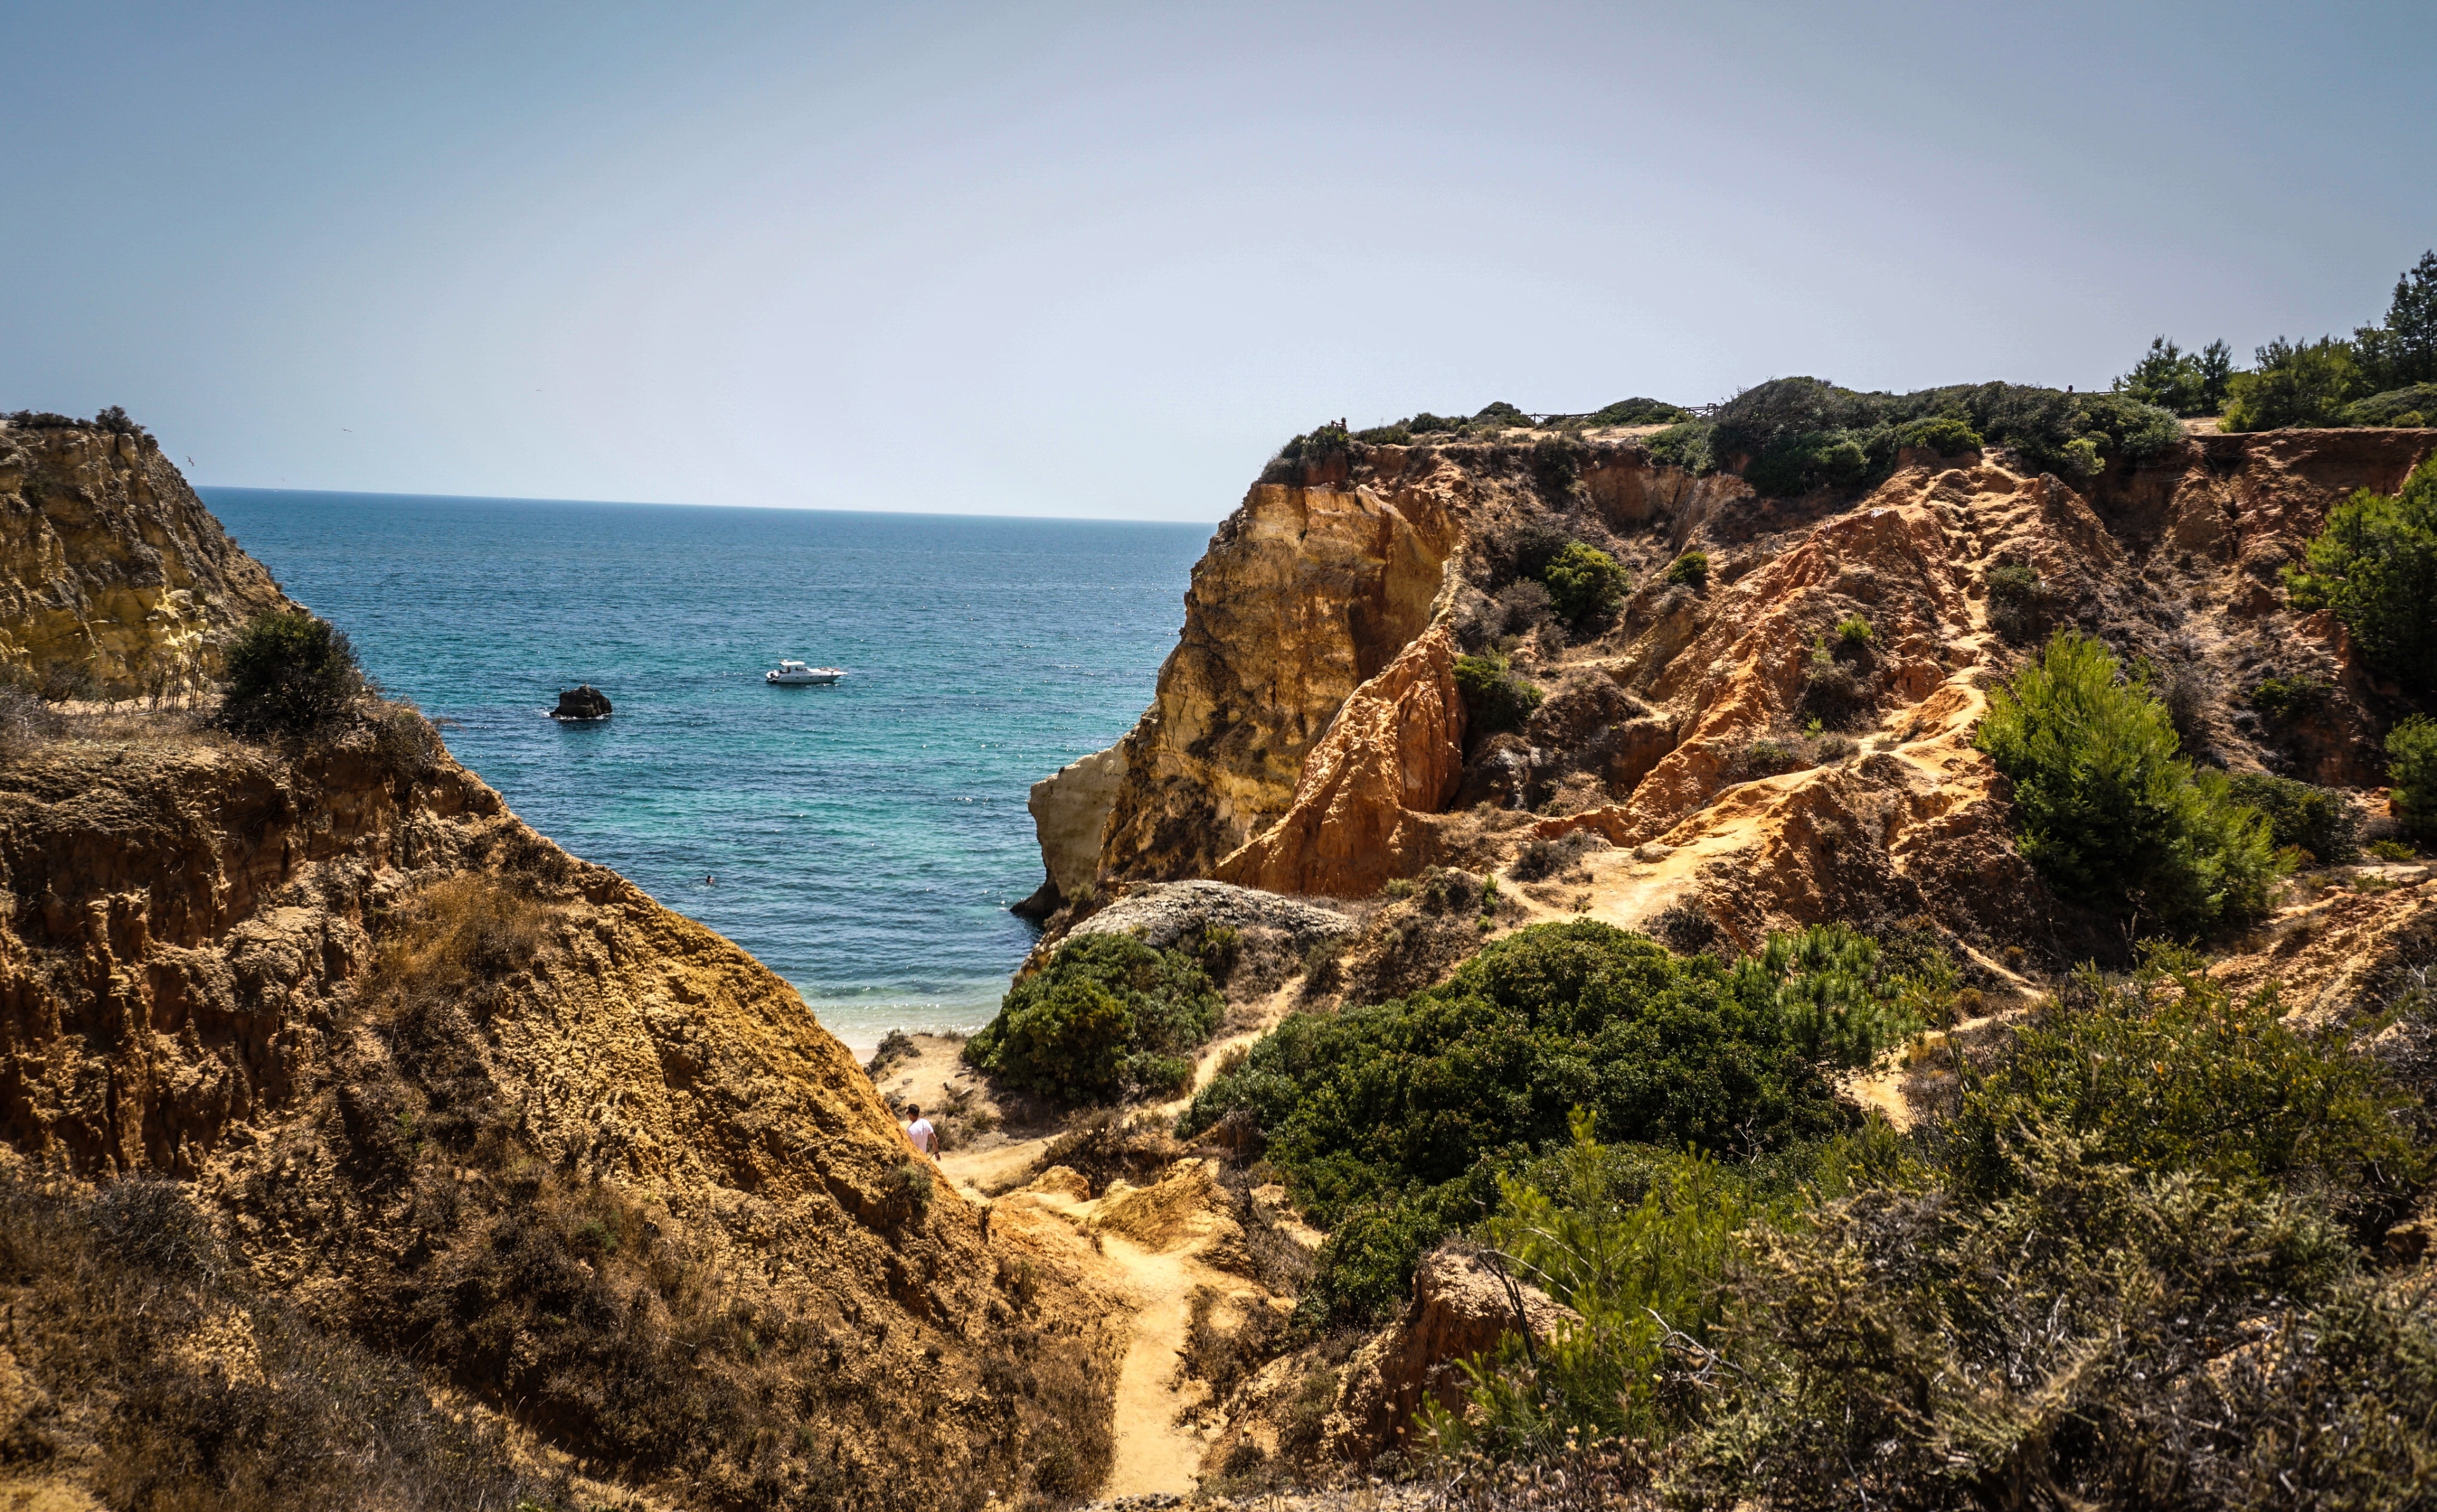 Hidden from the massification of Algarve during summer, Joao D'arens beach is a hidden gem that shows the pristine waters of the region with is sandy cliffs and pines. It is hard to find and enter, but once there, you'll see that it was completly worth it. #Trovember. 